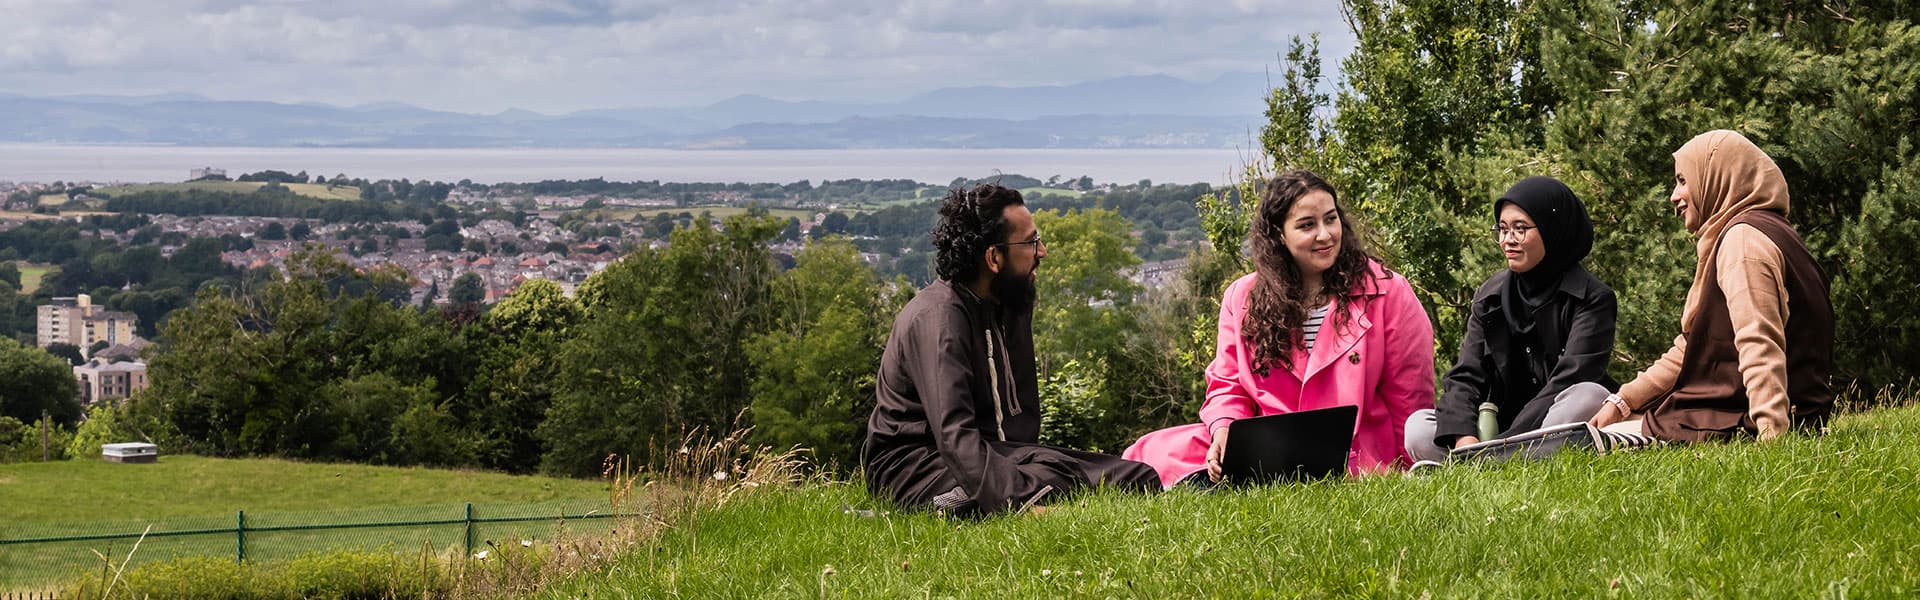 Staff sitting on grass, whilst surrounded by greenery. Morecambe Bay can be seen in the distance.